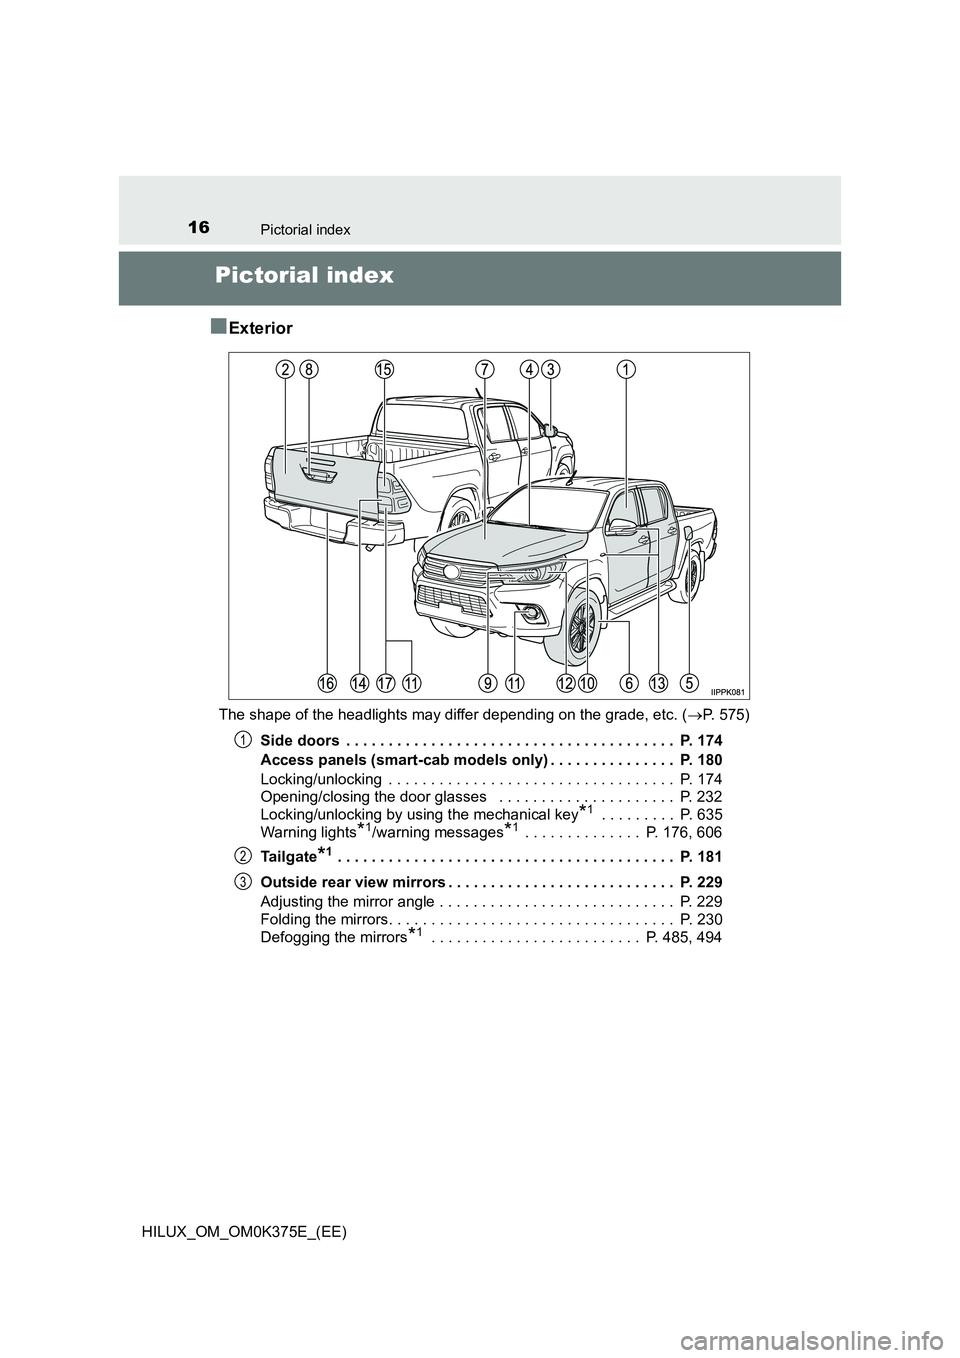 TOYOTA HILUX 2018  Owners Manual 16Pictorial index
HILUX_OM_OM0K375E_(EE)
Pictorial index 
■Exterior
The shape of the headlights may differ depending on the grade, etc. ( P. 575) 
Side doors  . . . . . . . . . . . . . . . . . . 